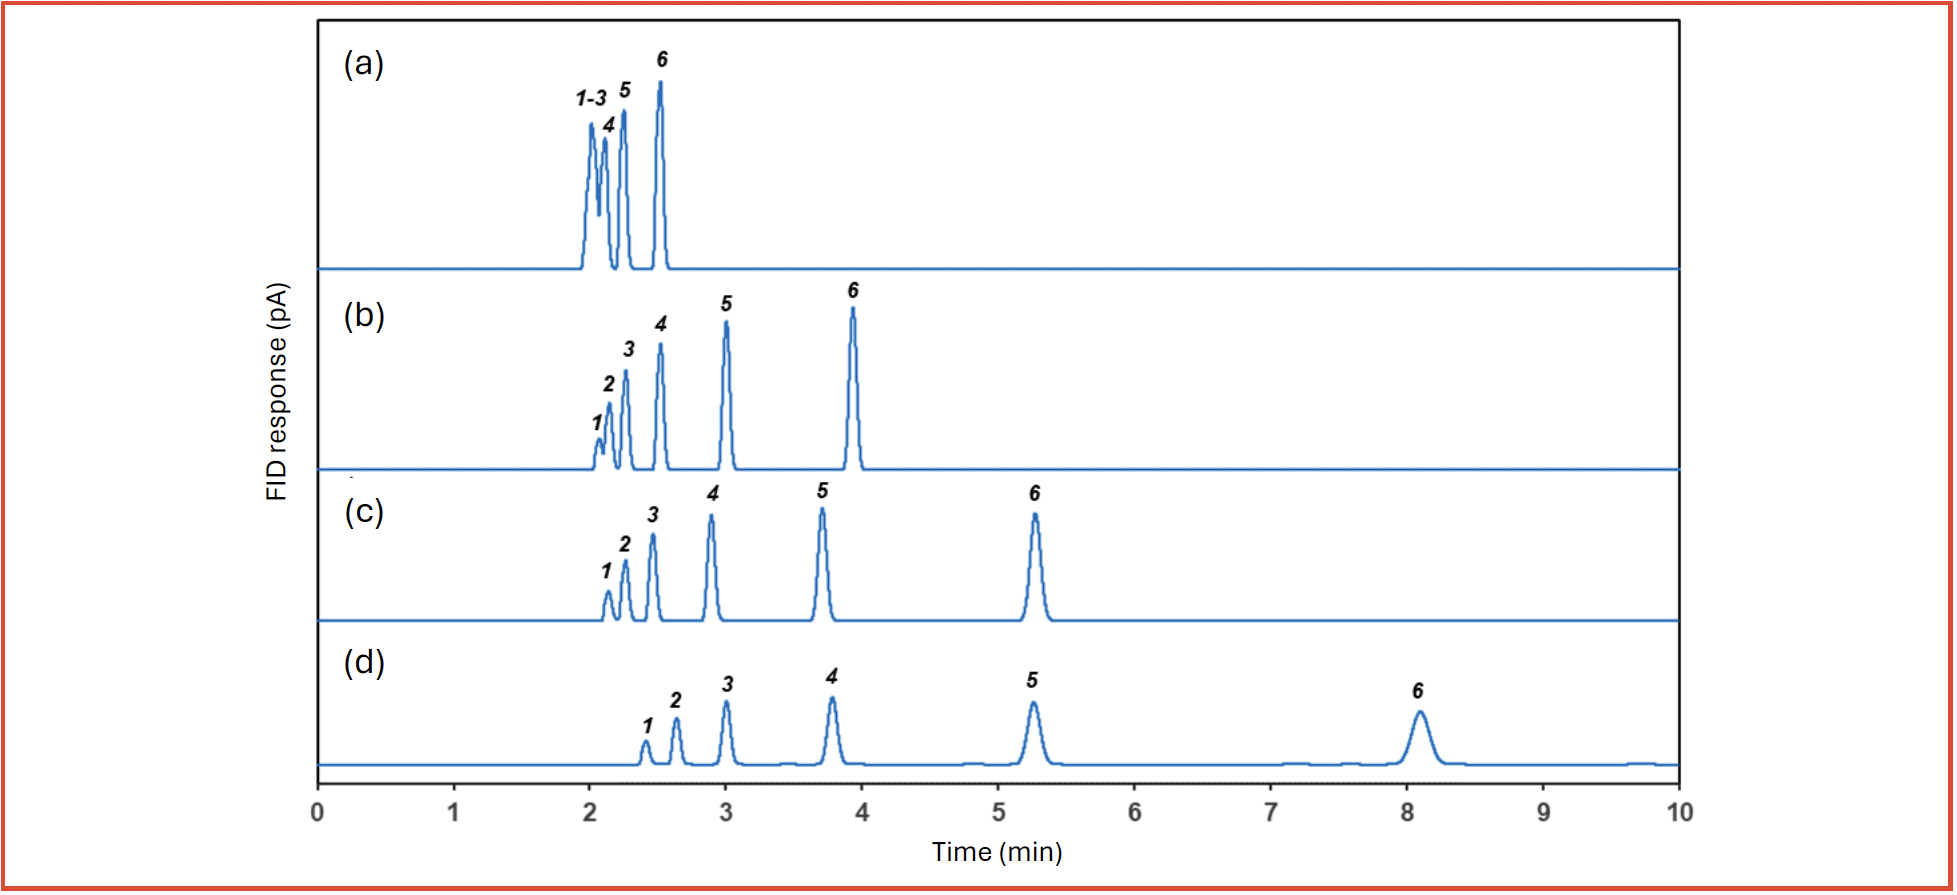 FIGURE 1: Overlay of chromatograms of 1000 ppm (v/v) each of n-alkanes (C1–C6) in nitrogen on 60 m × 0.32 mm id PDMS columns with different film thickness: (a) 1 μm (β = 80); (b) 3 μm (β = 27); (c) 5 μm (β = 16); (d) 8 μm (β = 10).